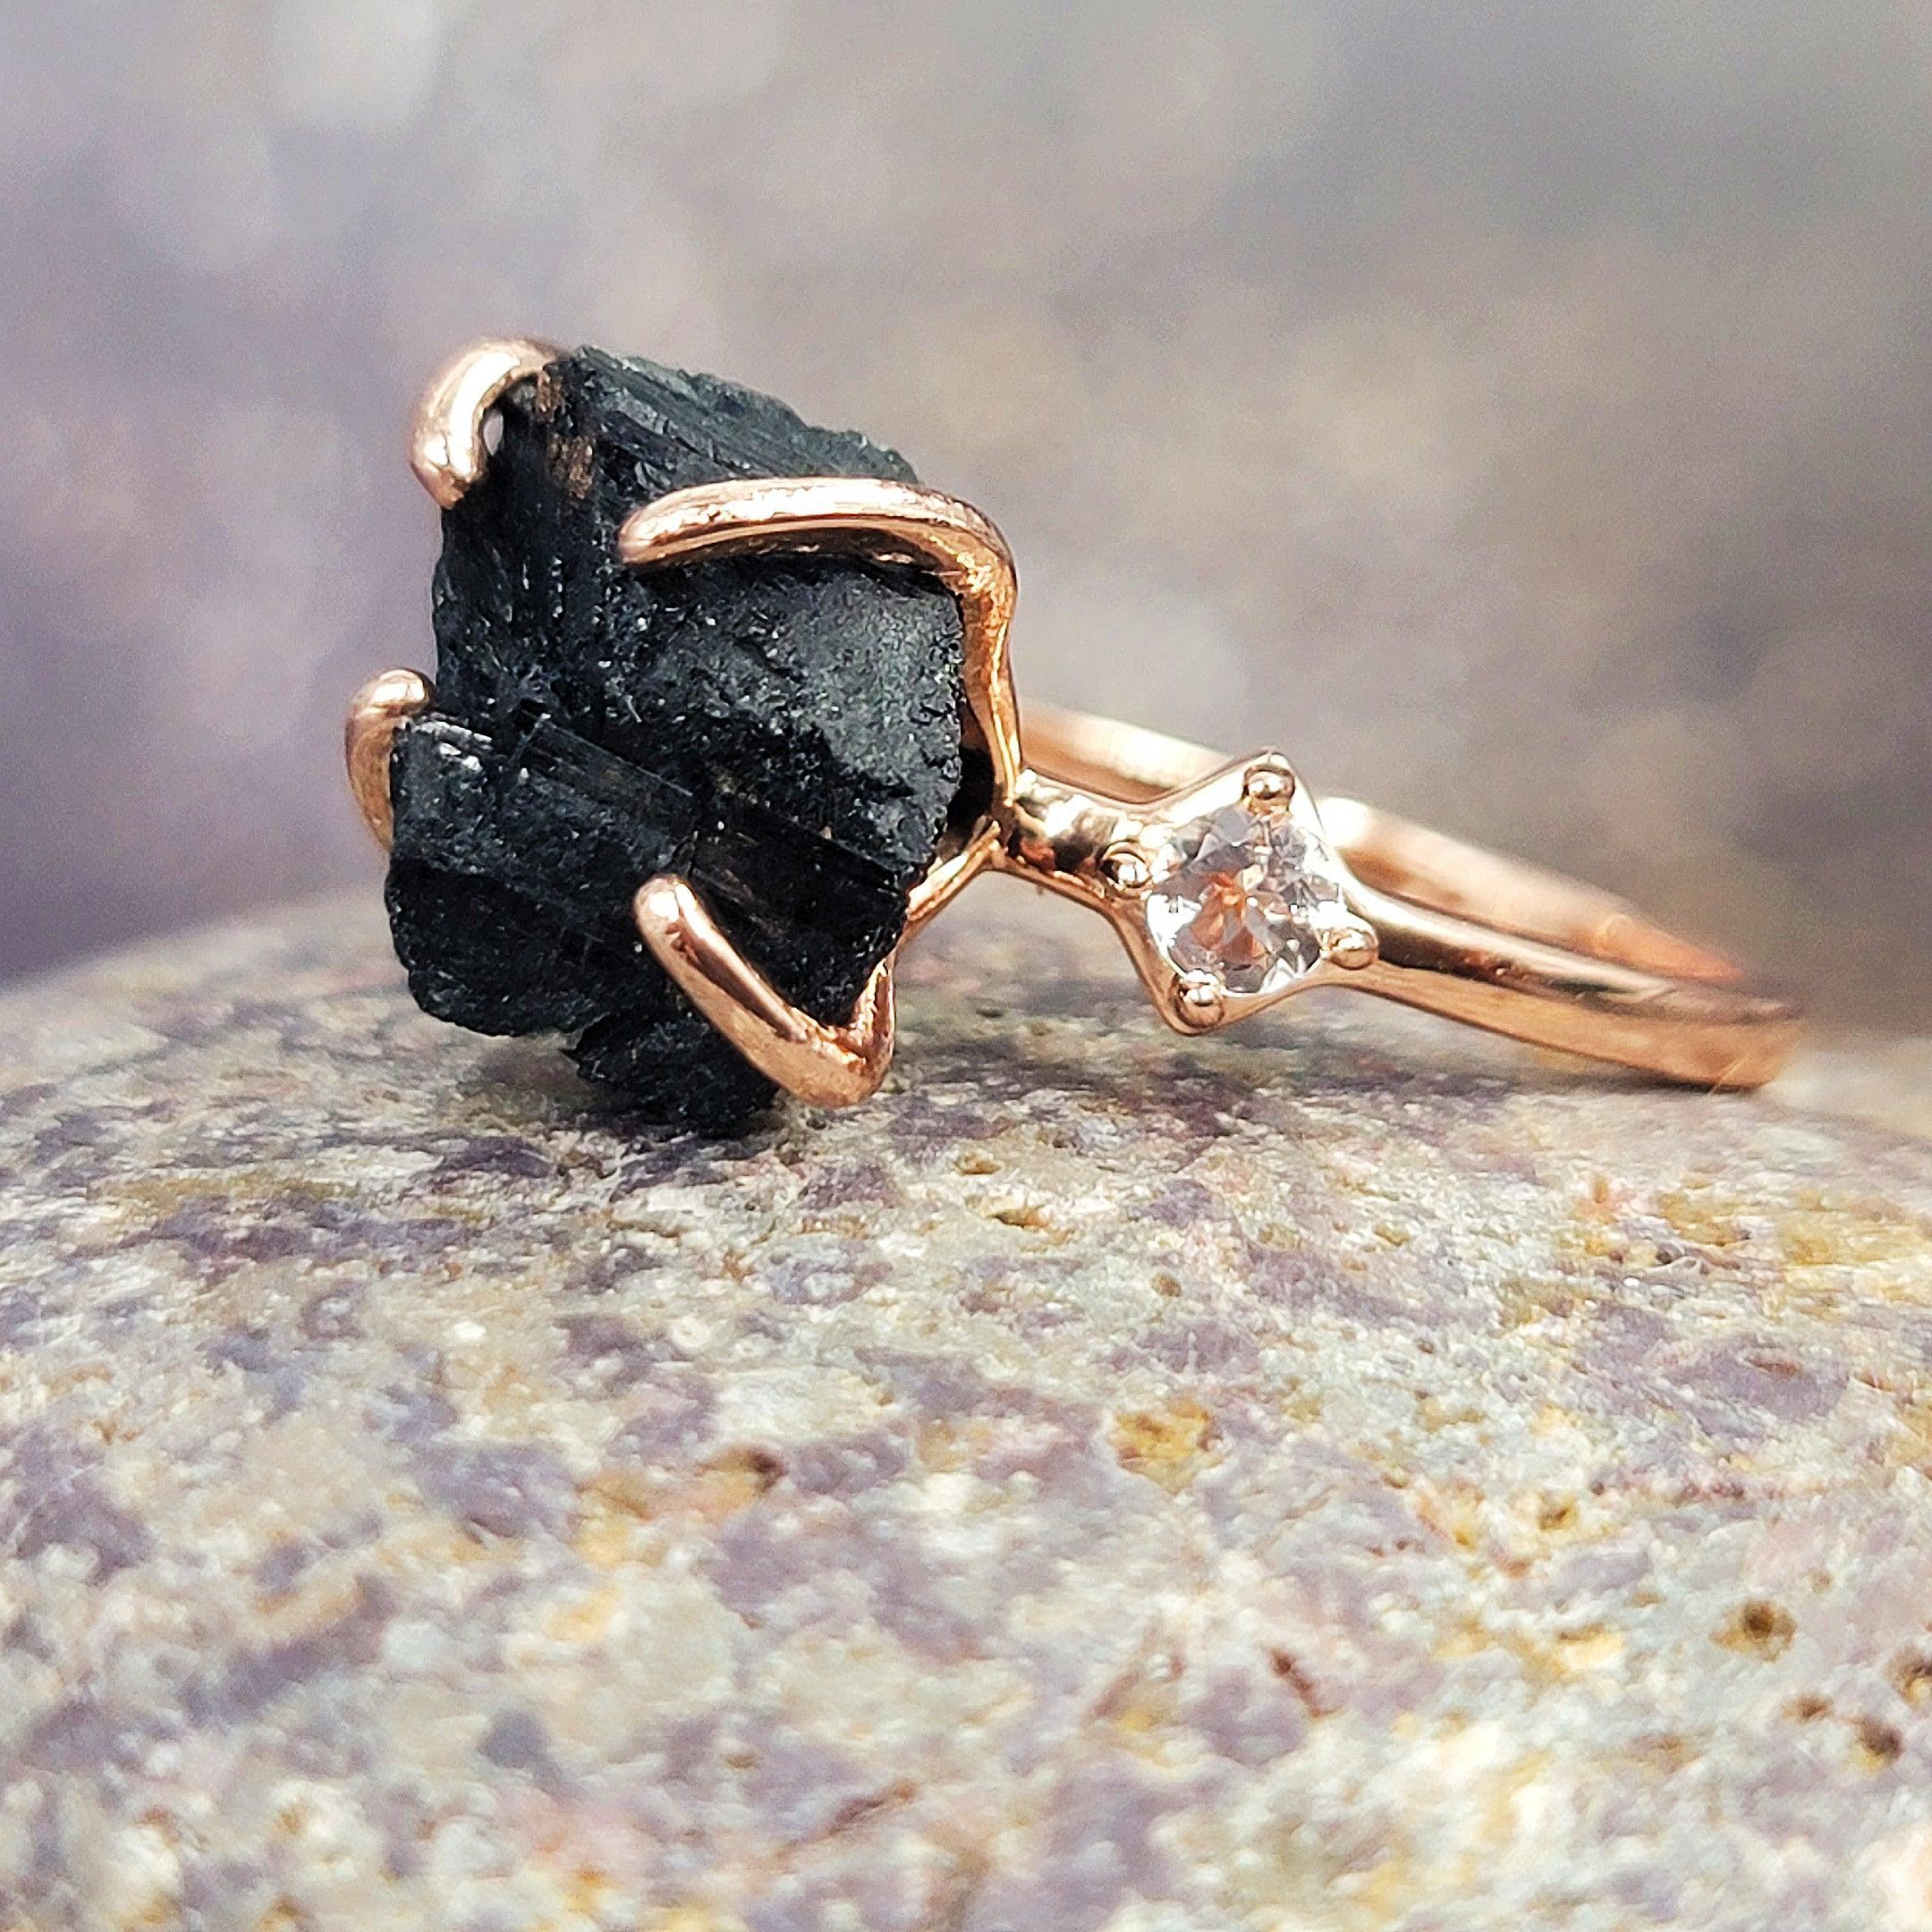 Black Tourmaline & Pyrite Ring | Made In Earth US